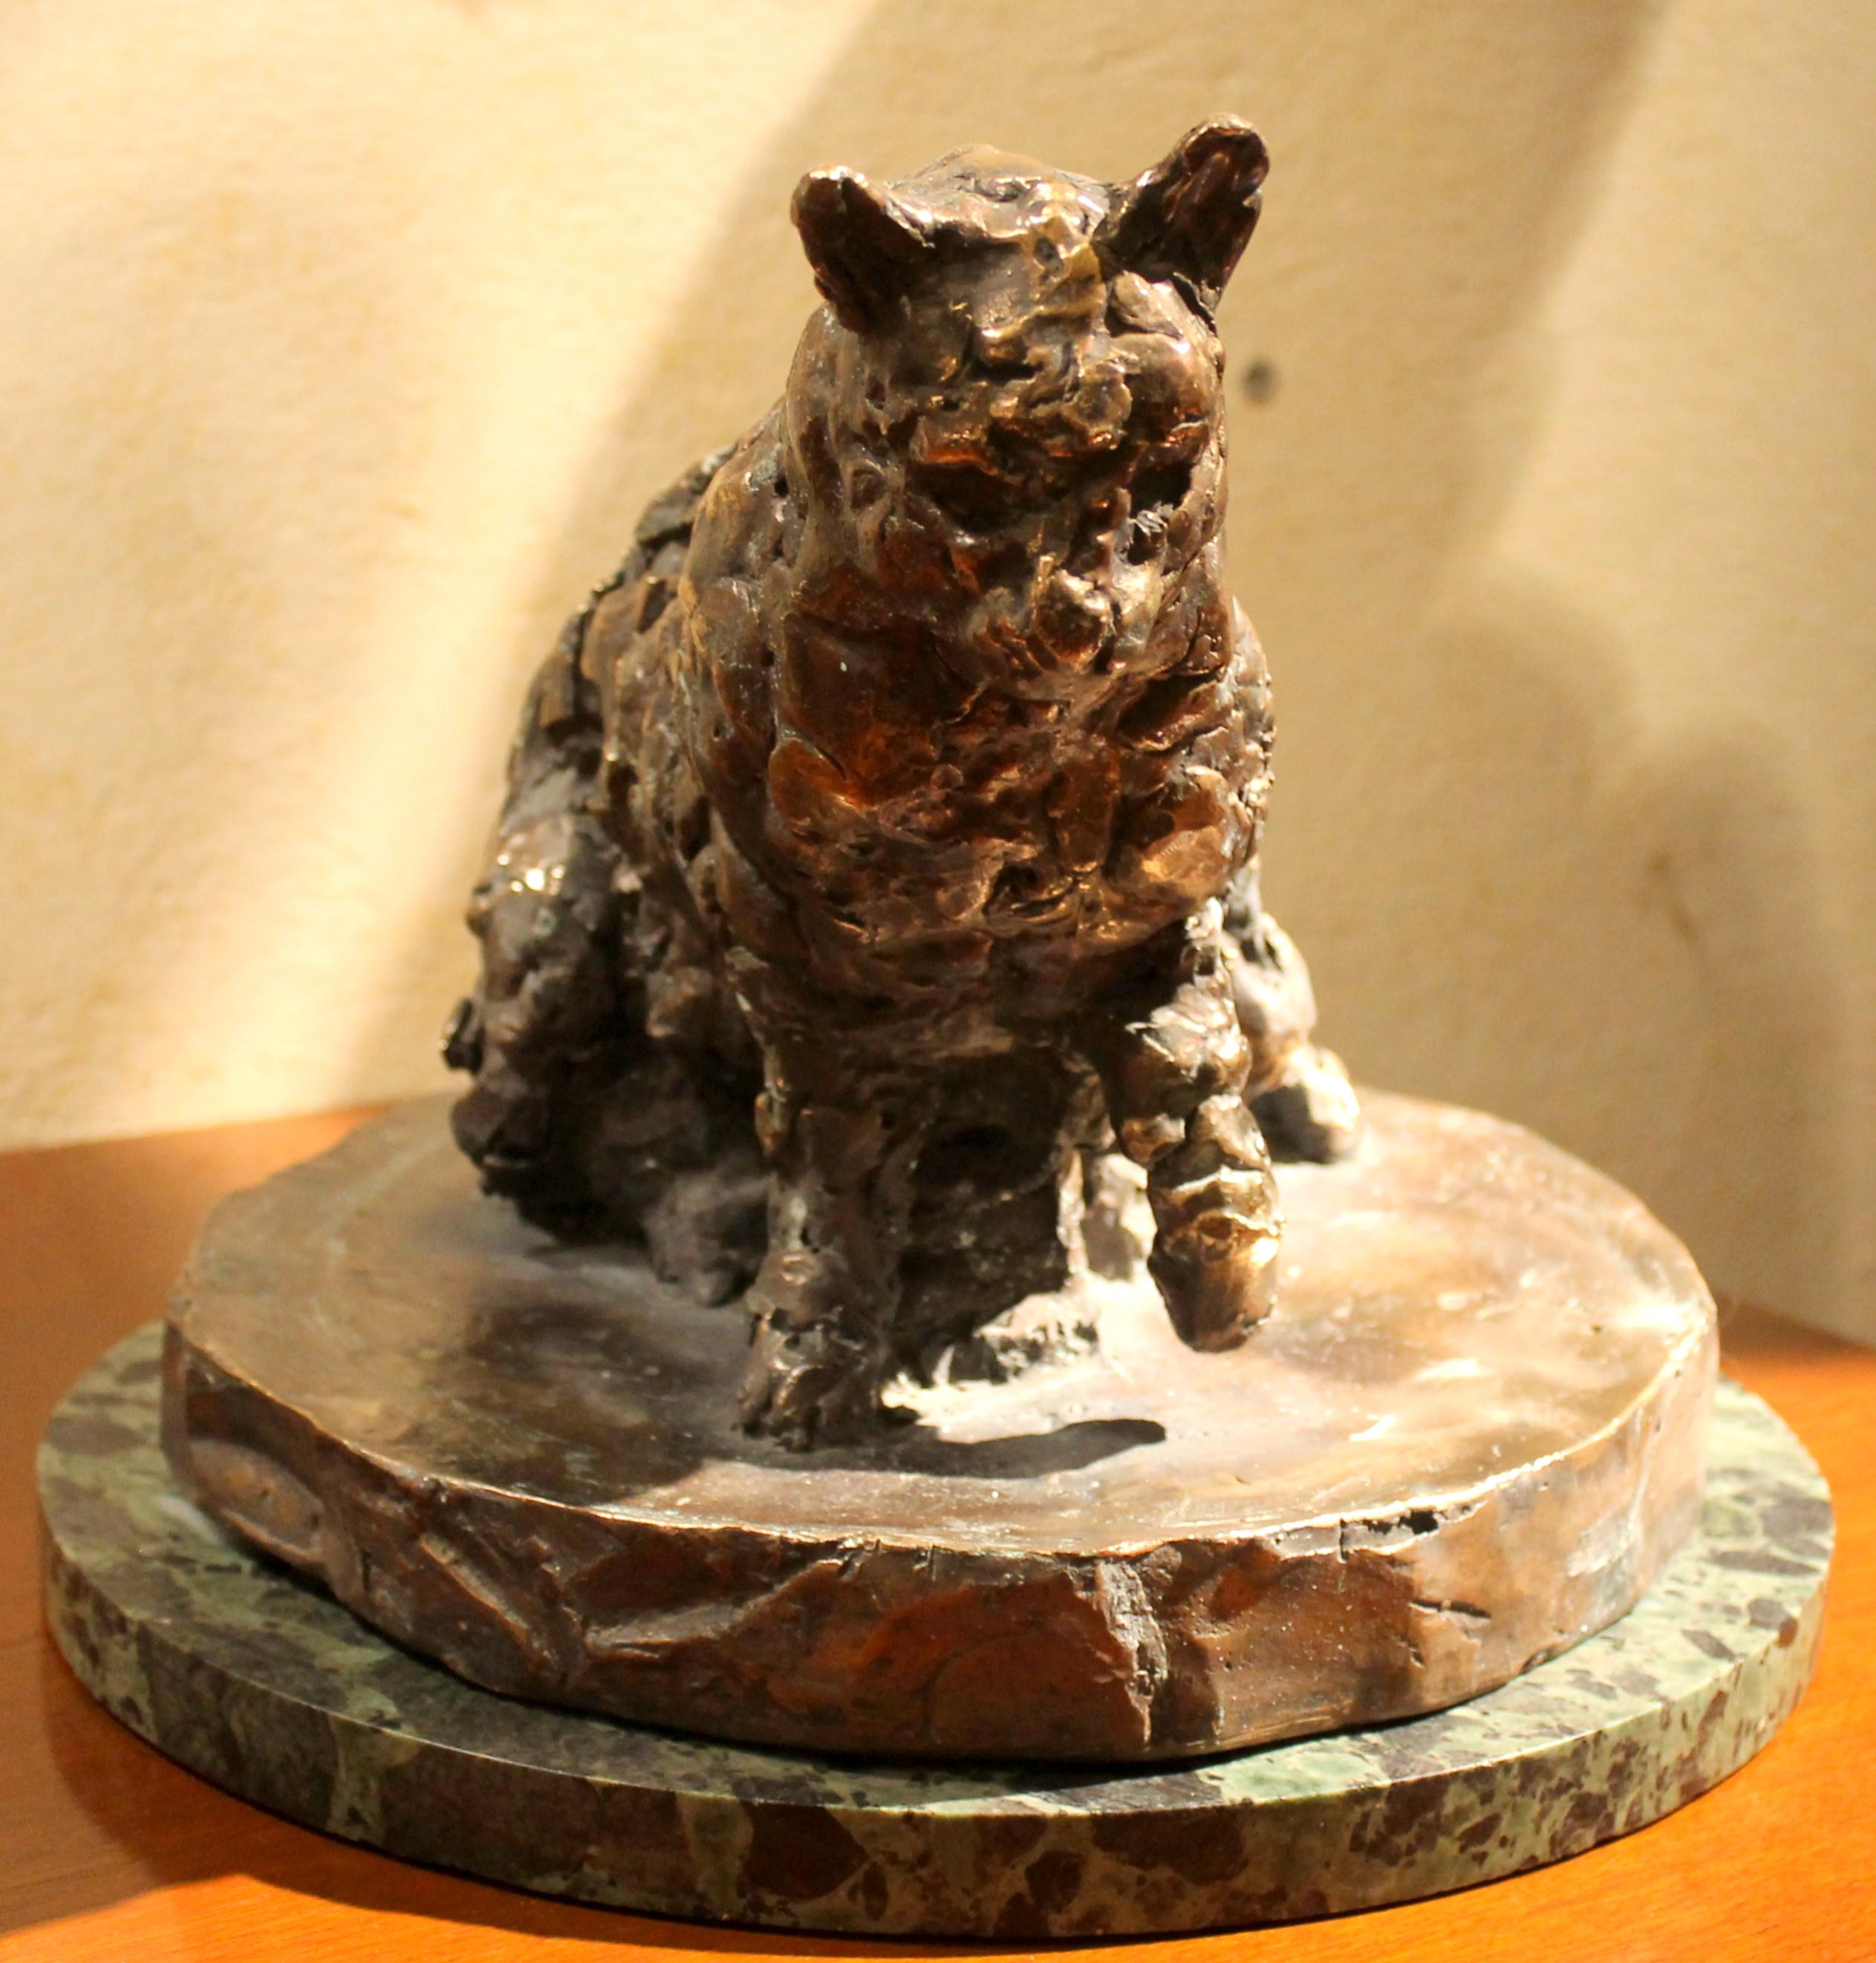 This exquisite solid bronze sculpture of a cat on a round base is handmade with incredible detail, the artist is able to capture a moment frozen in time but on the same time simultaneously creates both movement and static effects. 
The animal